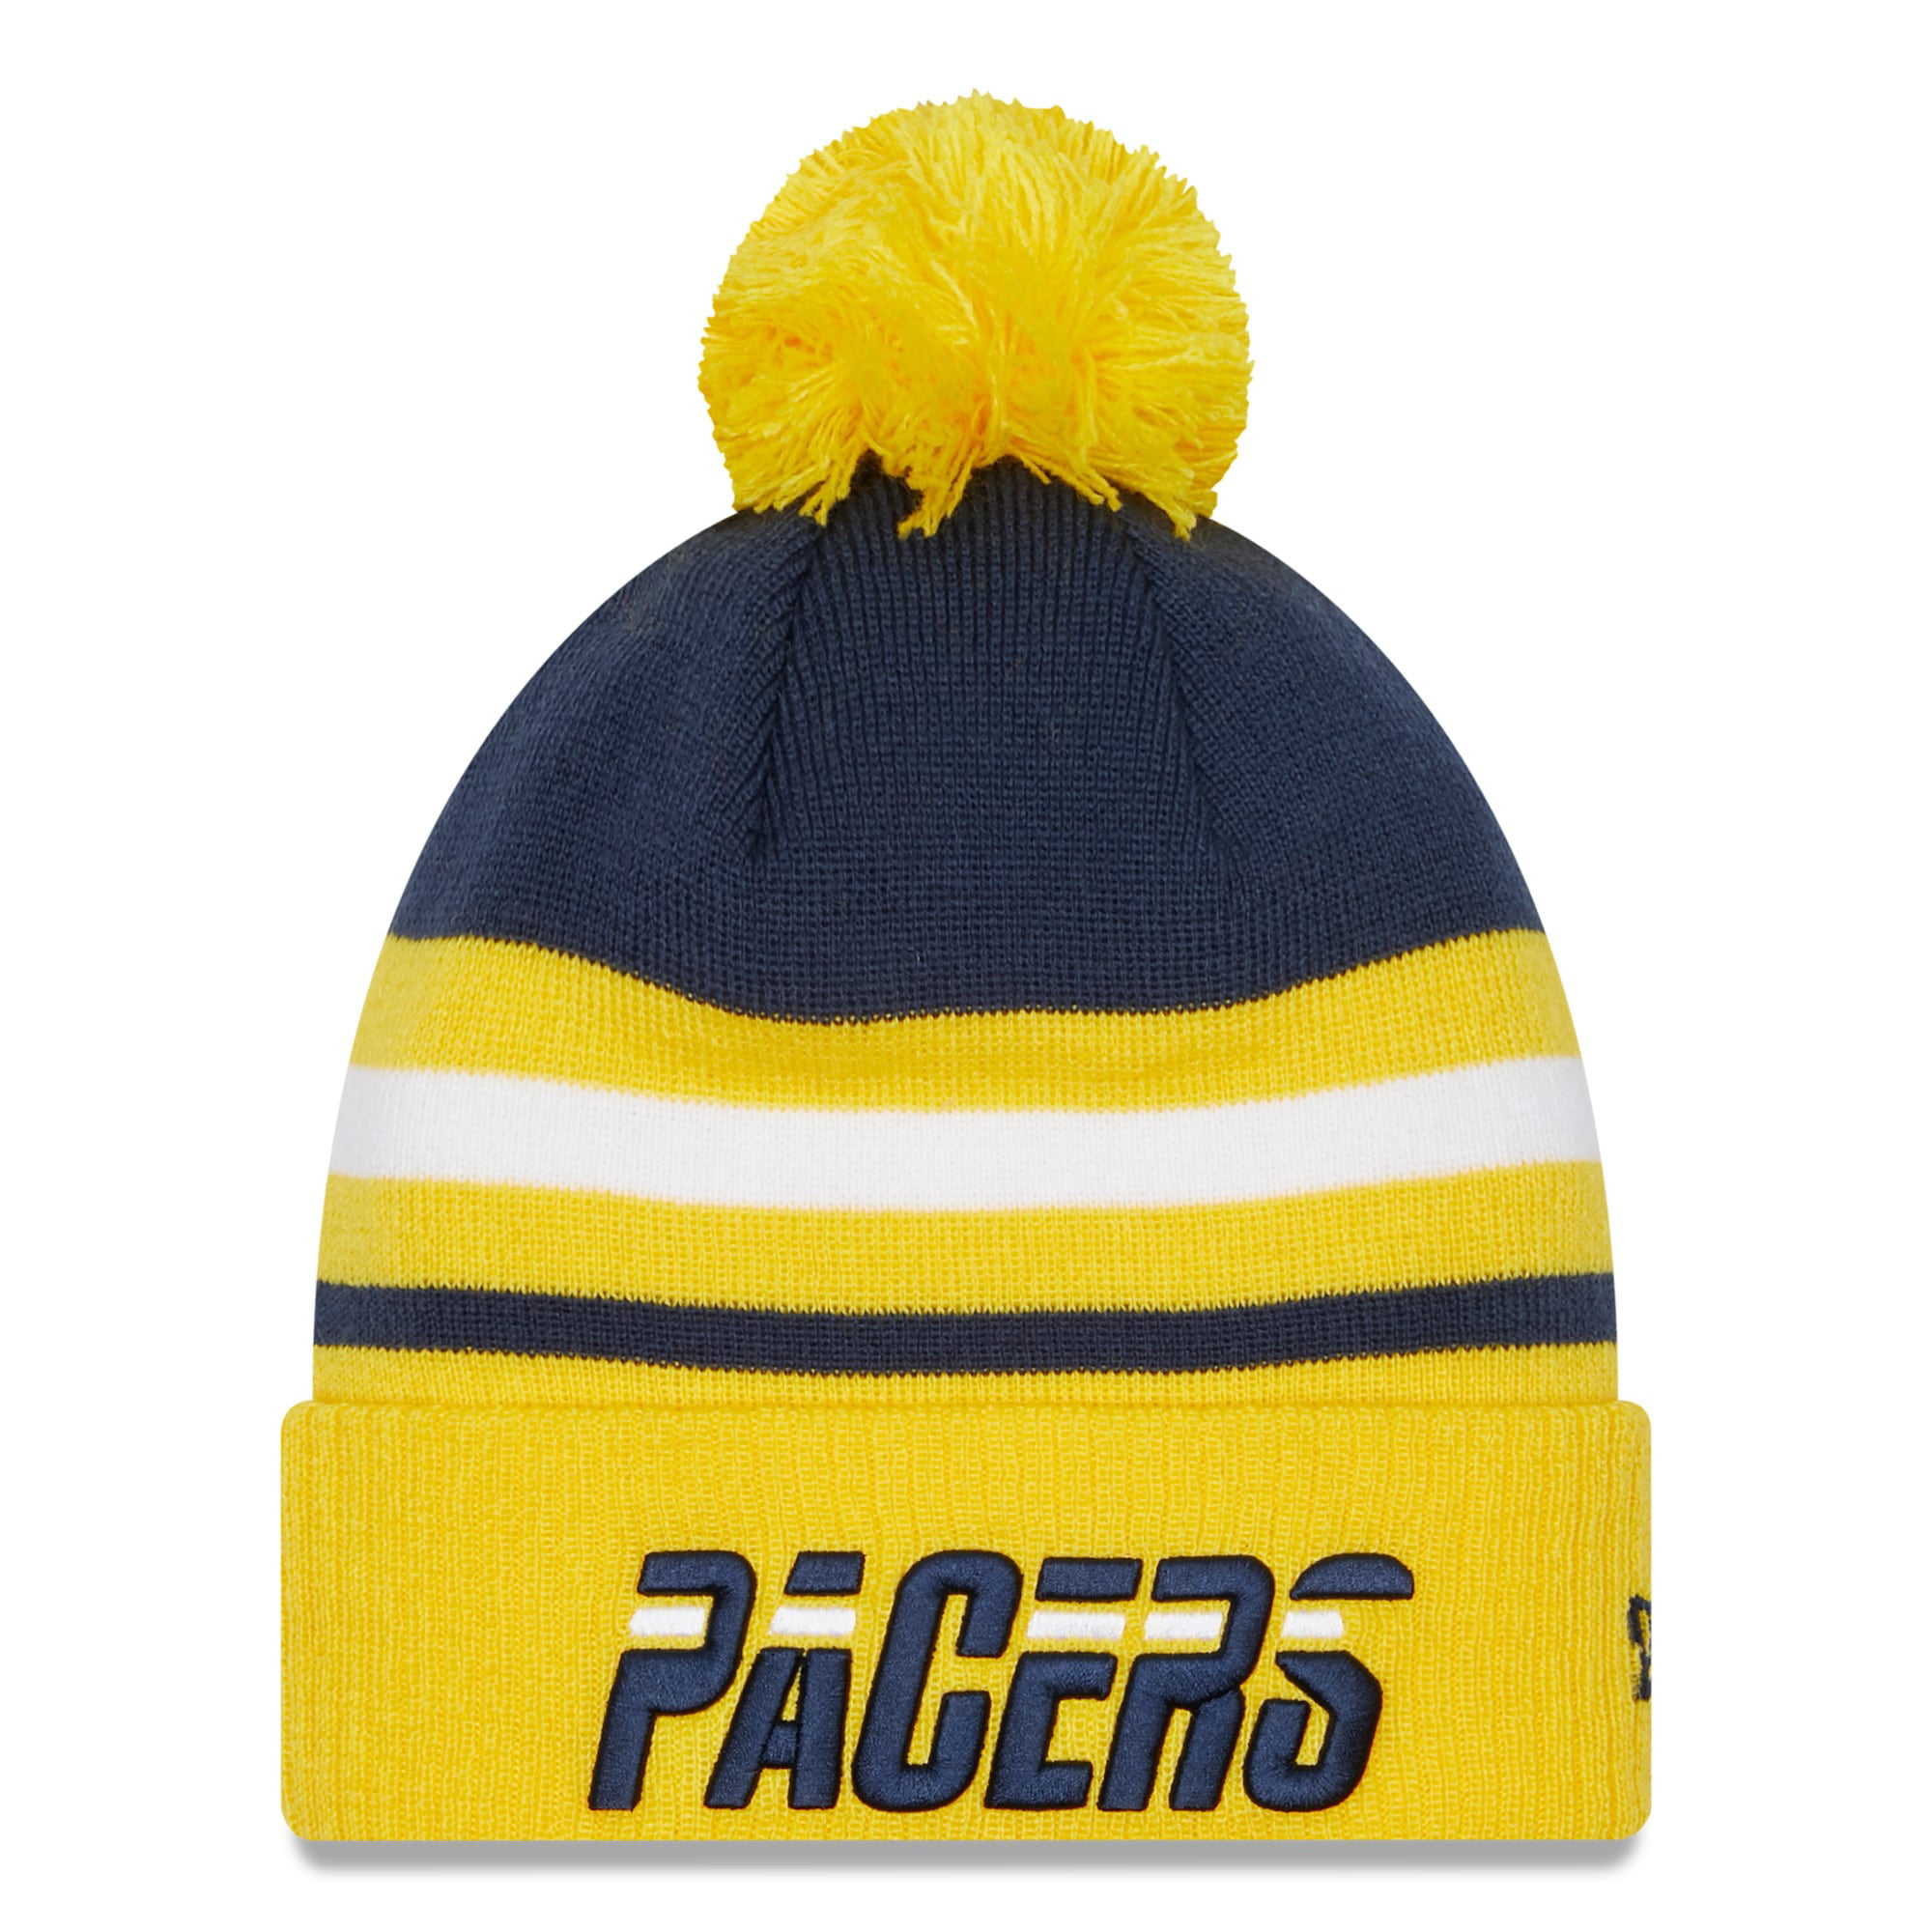 Men's New Era Yellow Indiana Pacers 2021/22 City Edition Official ...